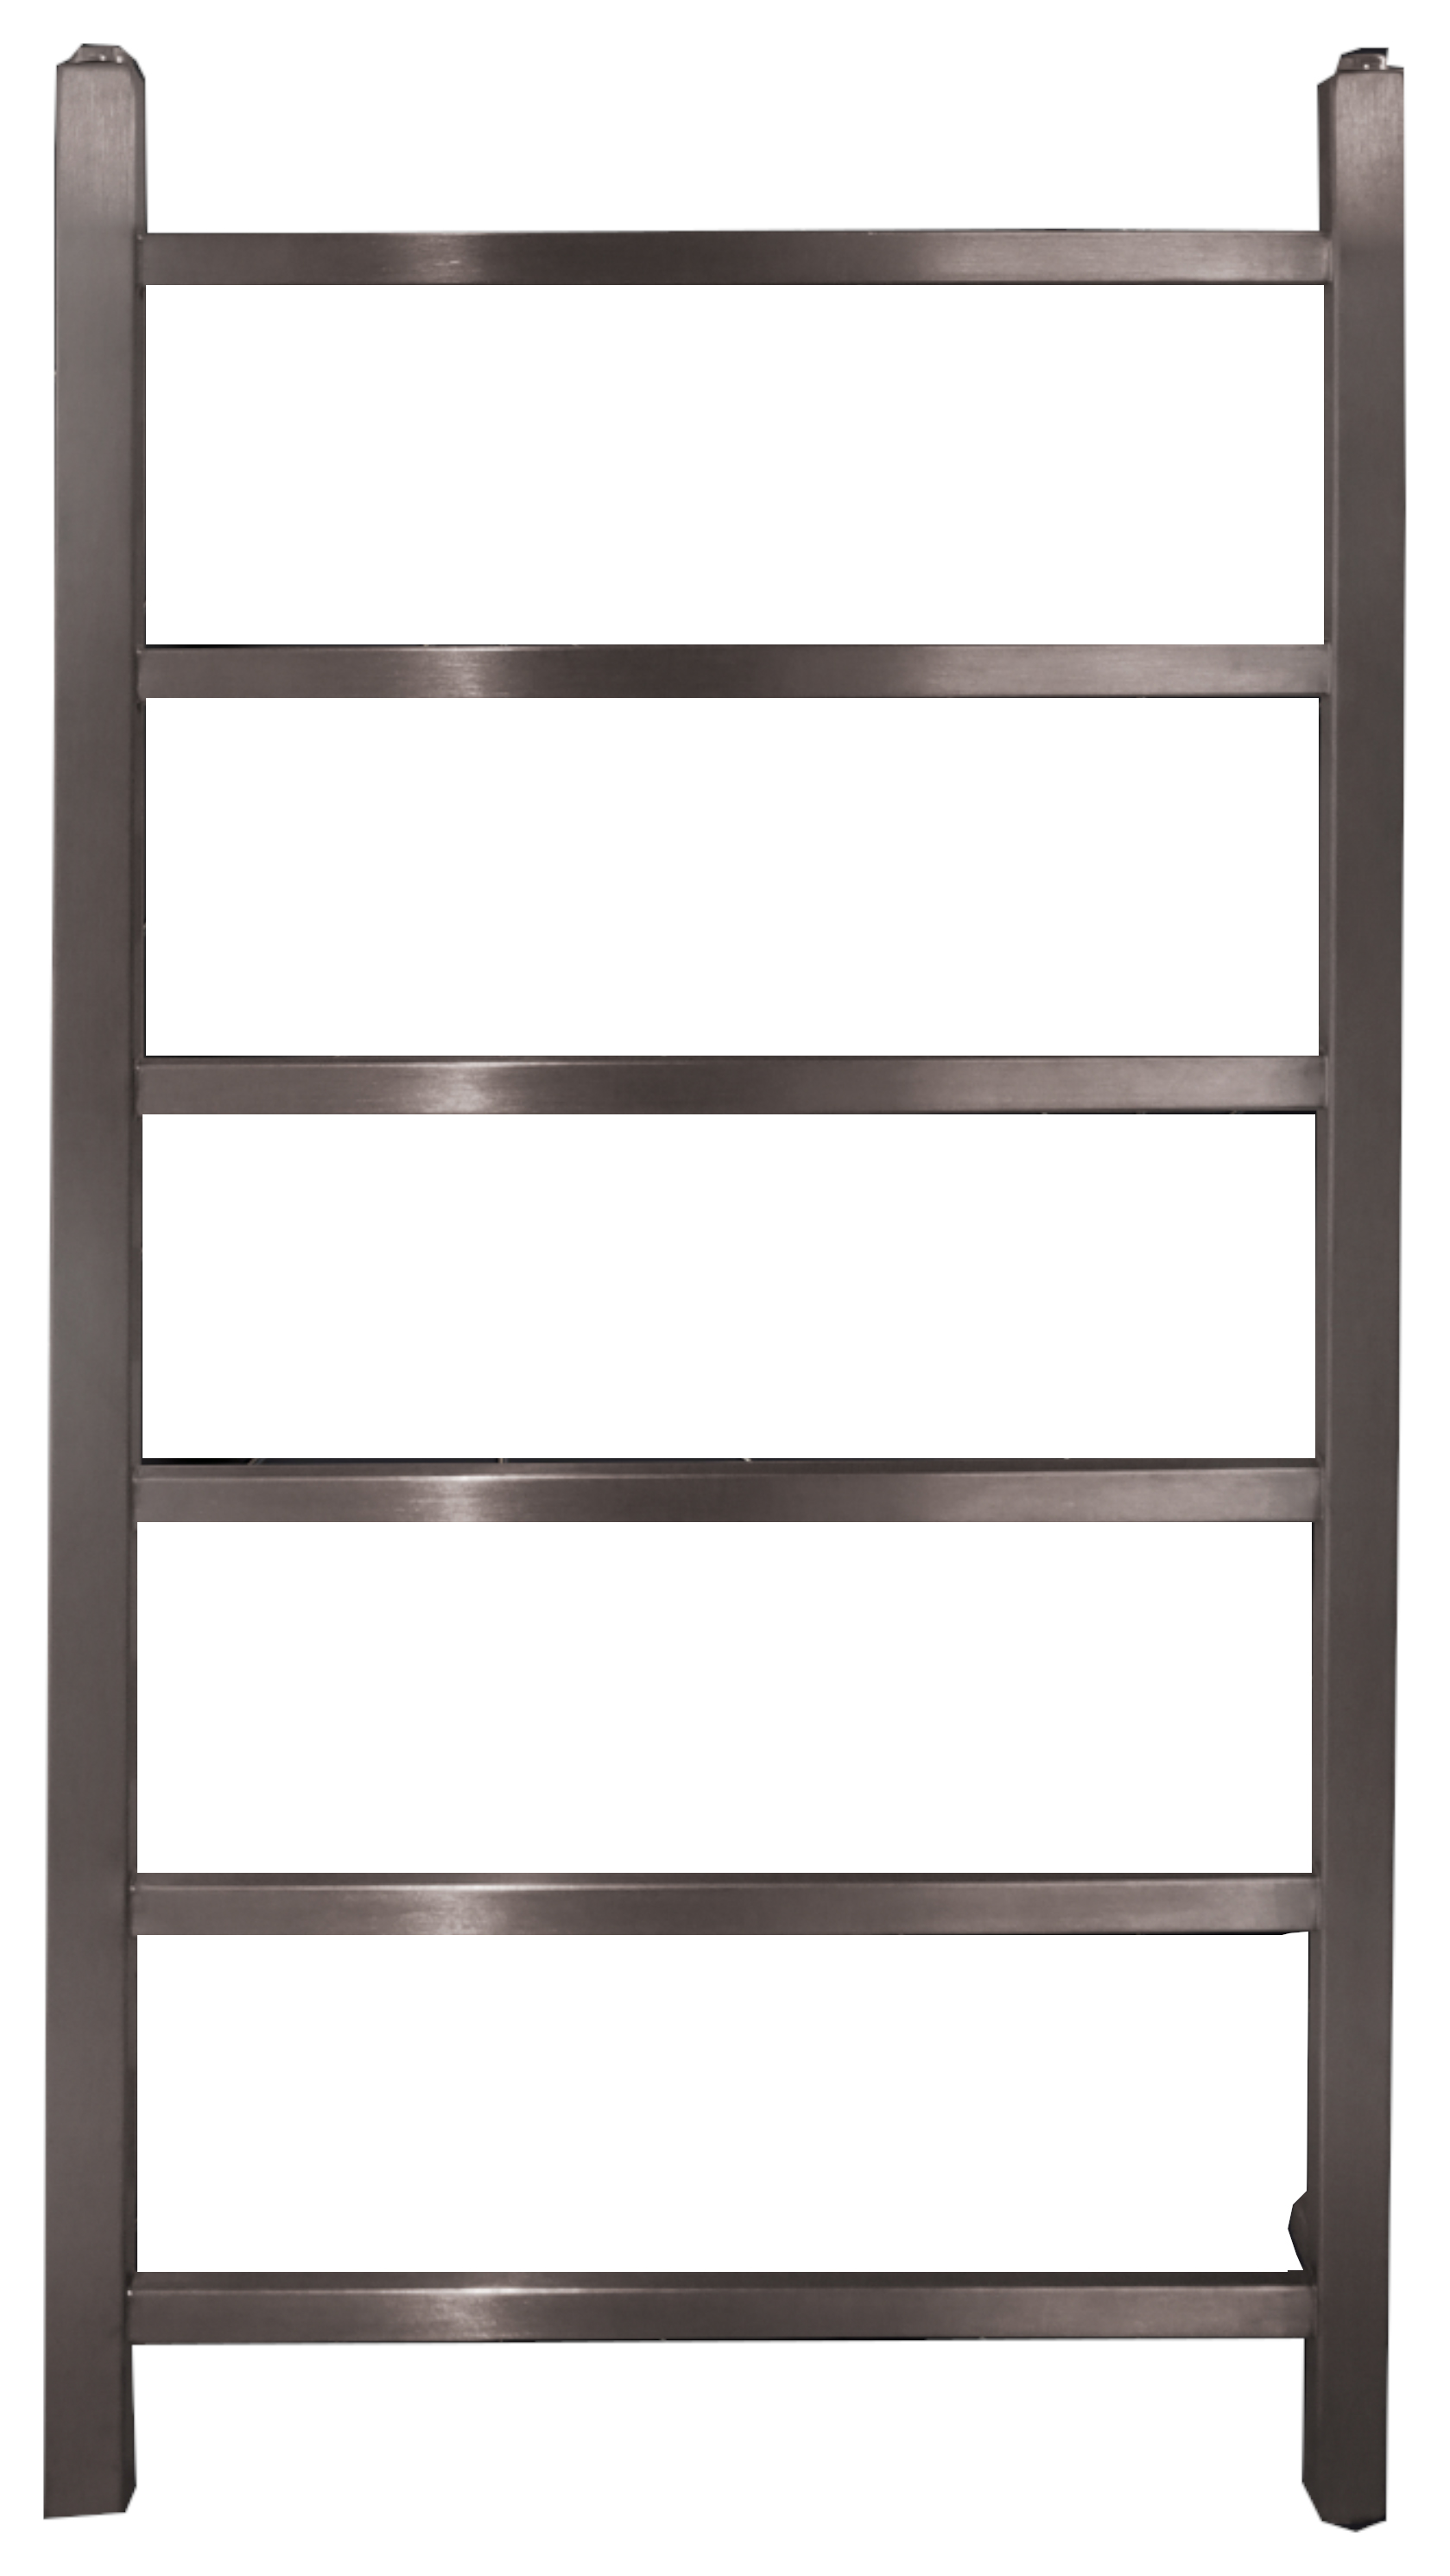 Image of Towelrads Diva Brushed Stainless Steel Dry Electric Non Thermostatic Towel Radiator - 800 x 500mm